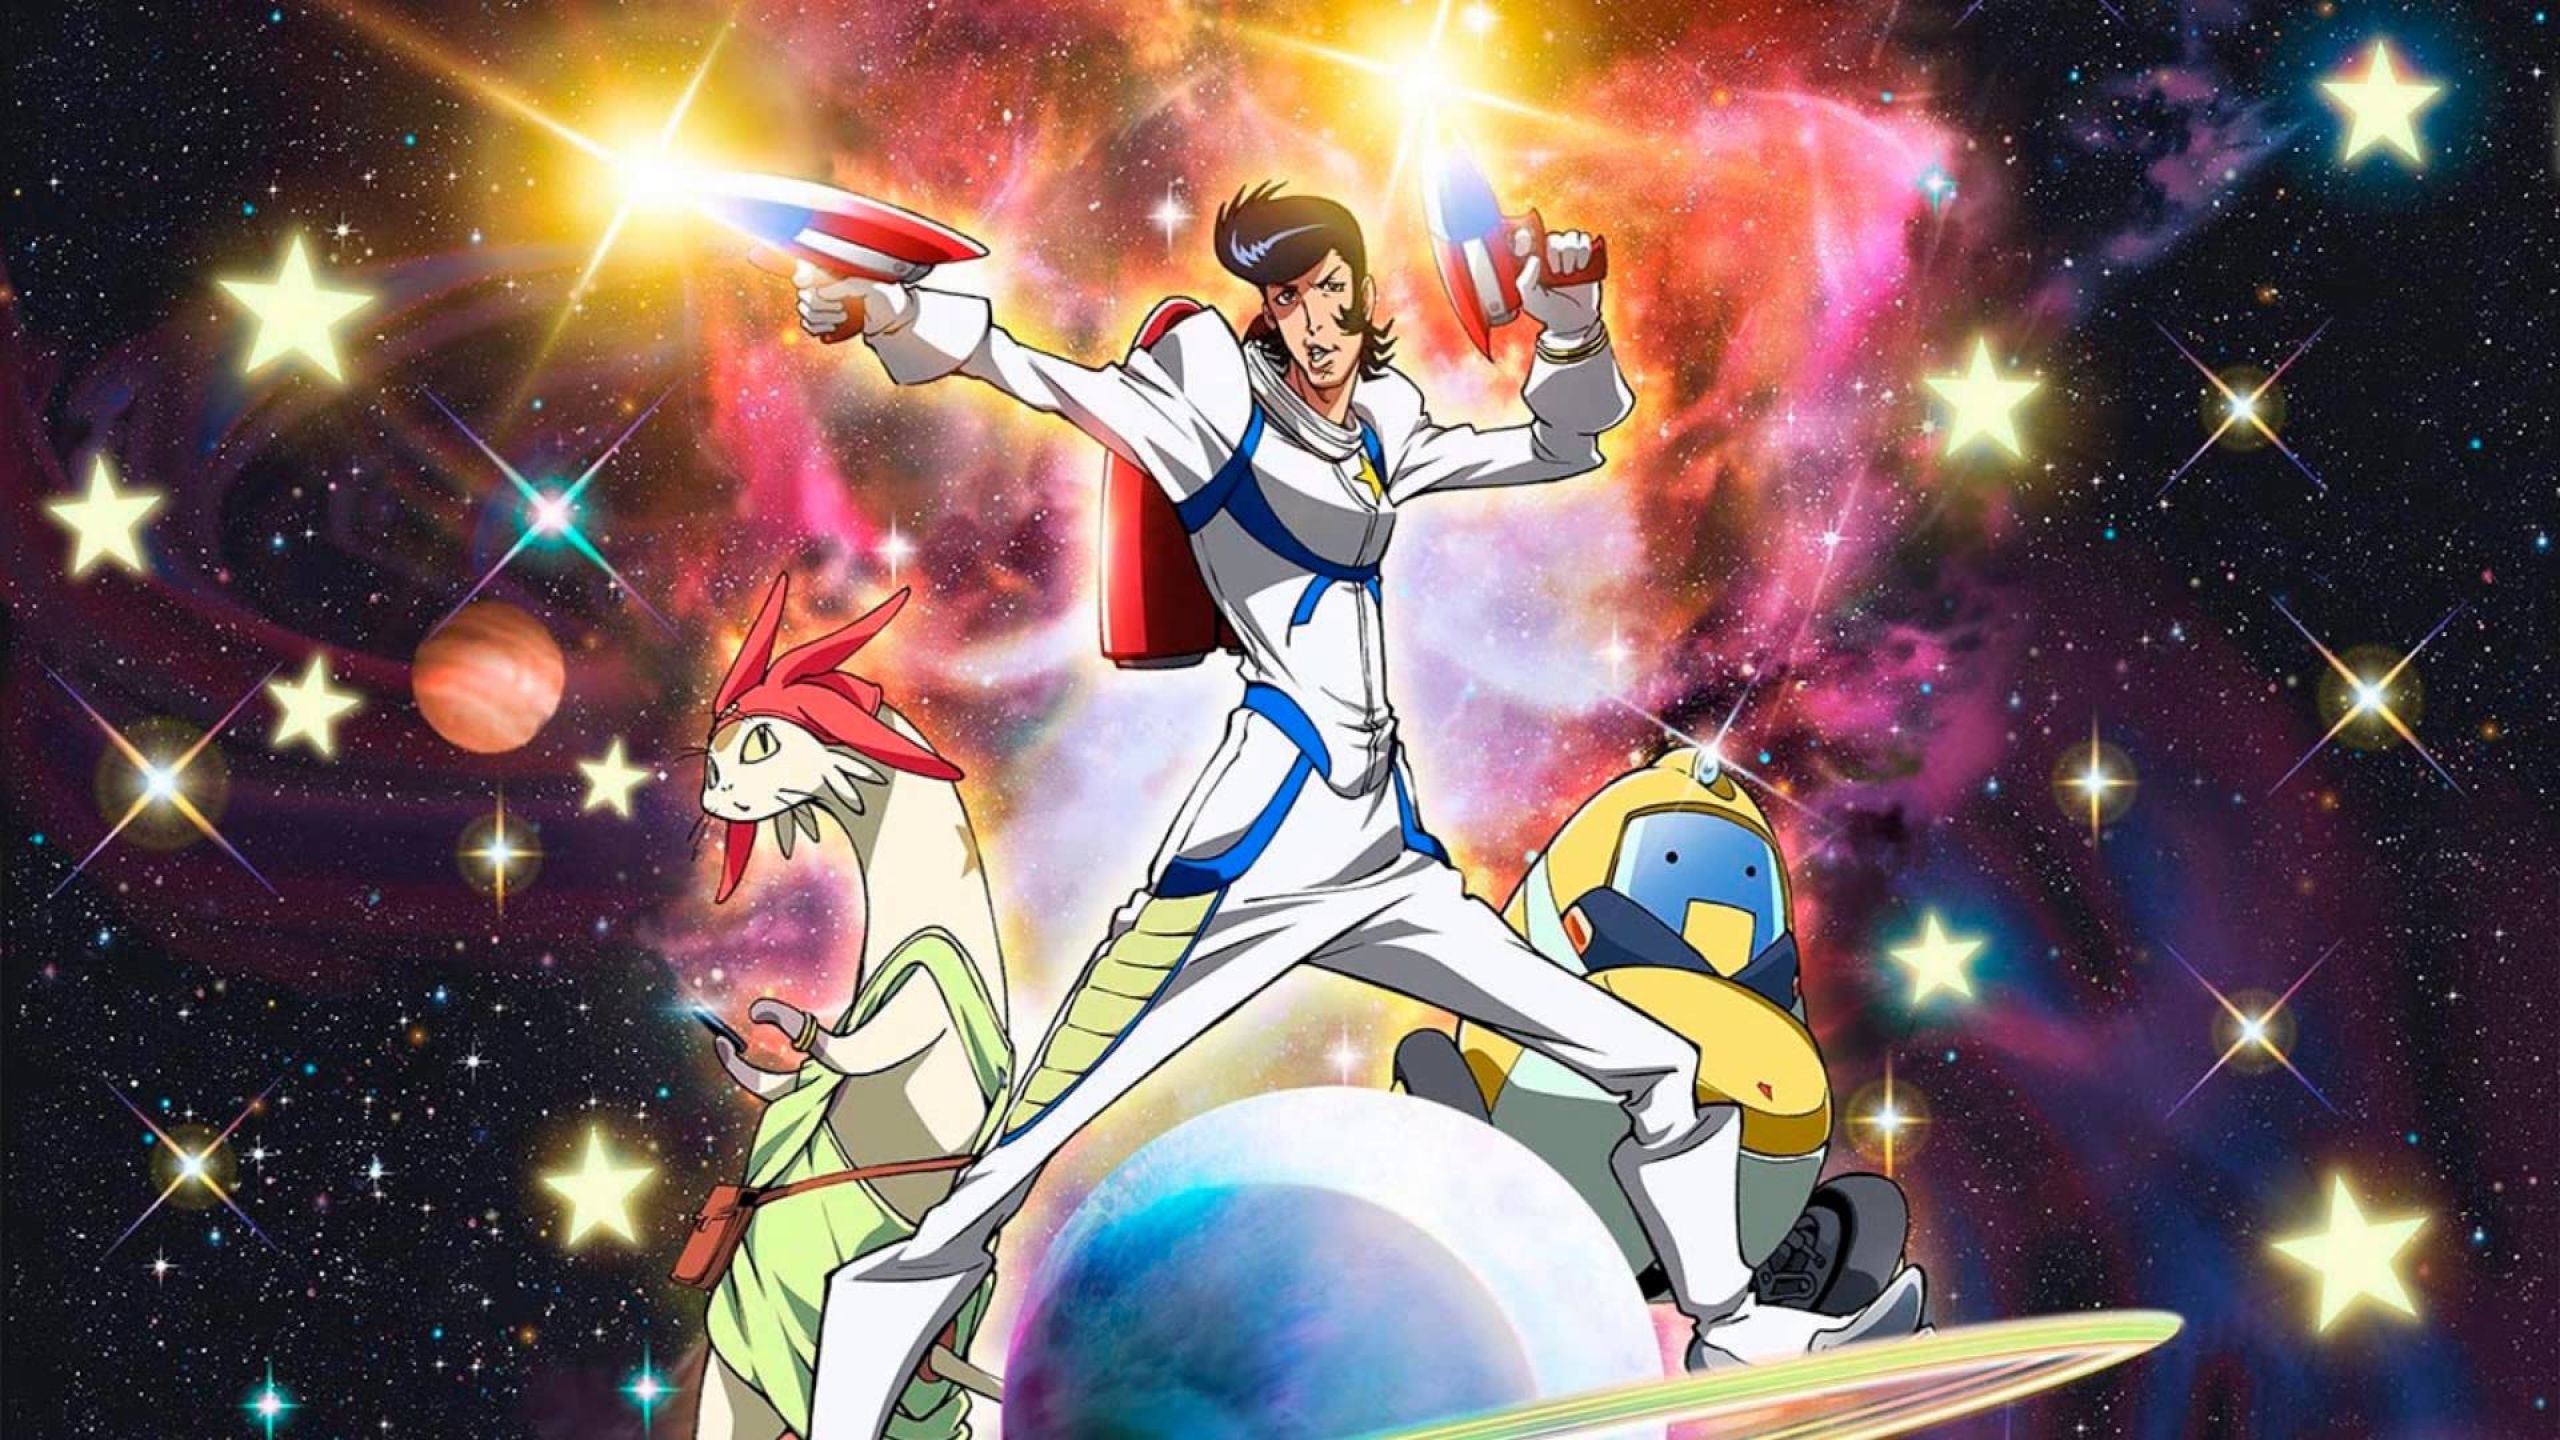 space dandy, dandy, meow 1440P Resolution Wallpaper, HD Anime 4K Wallpaper, Image, Photo and Background